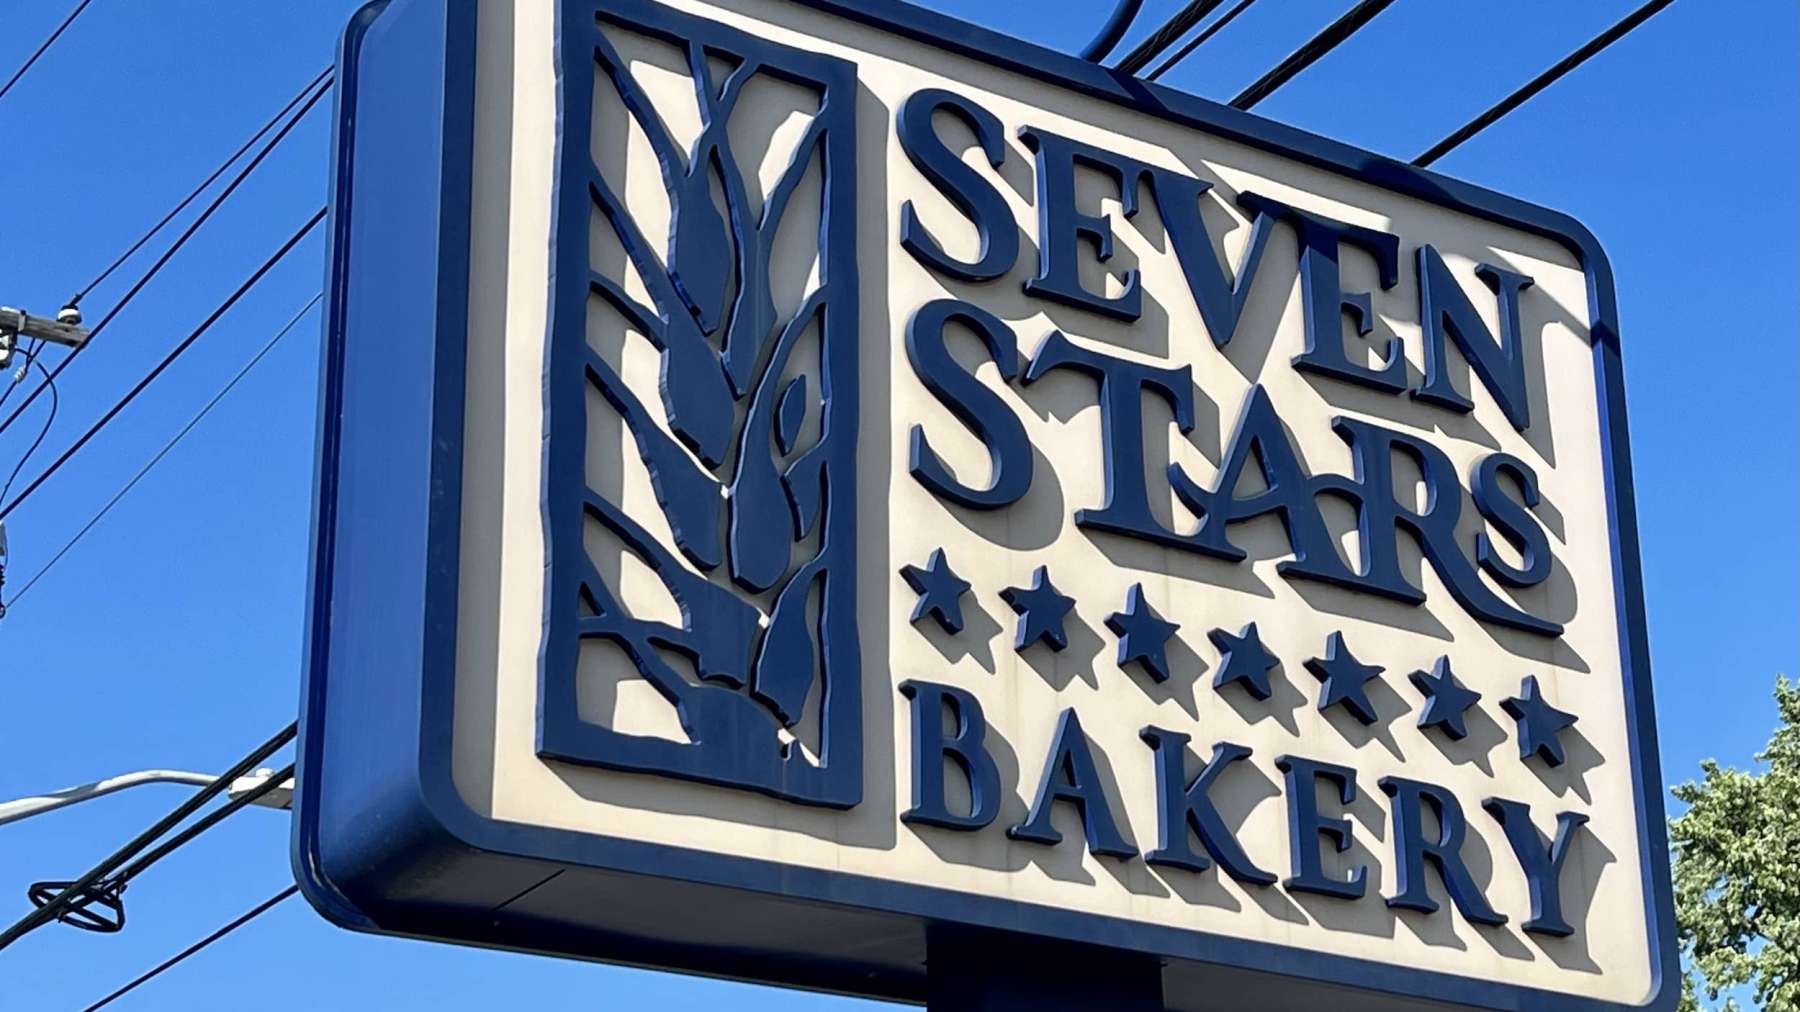 Seven Stars owners voluntarily recognize new union